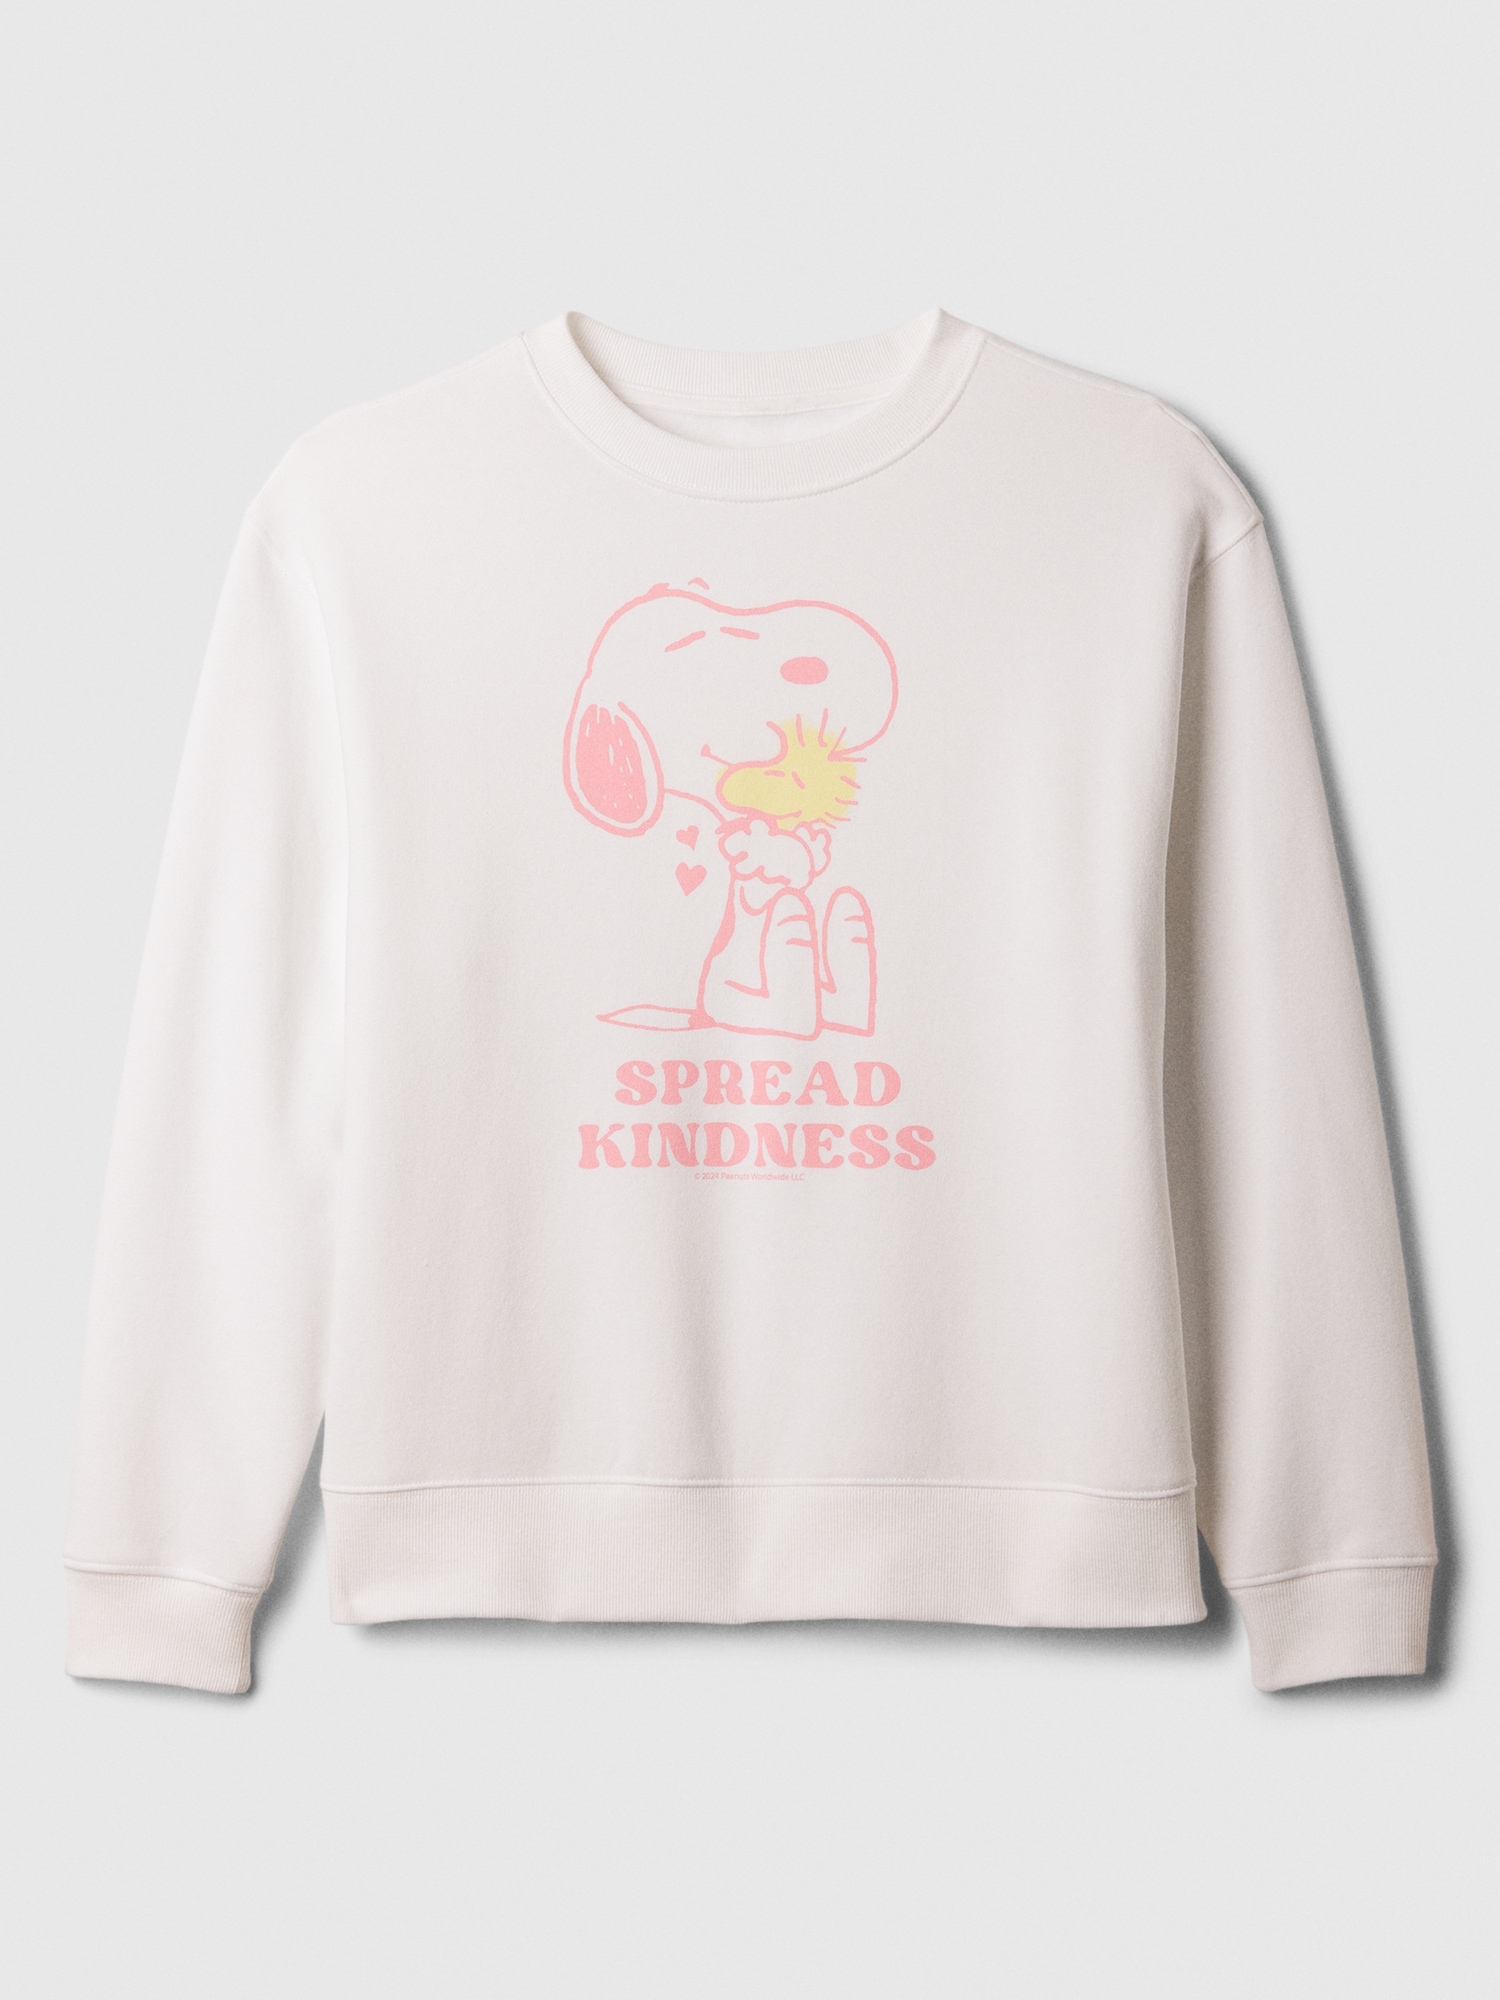 Relaxed Peanuts Graphic Sweatshirt